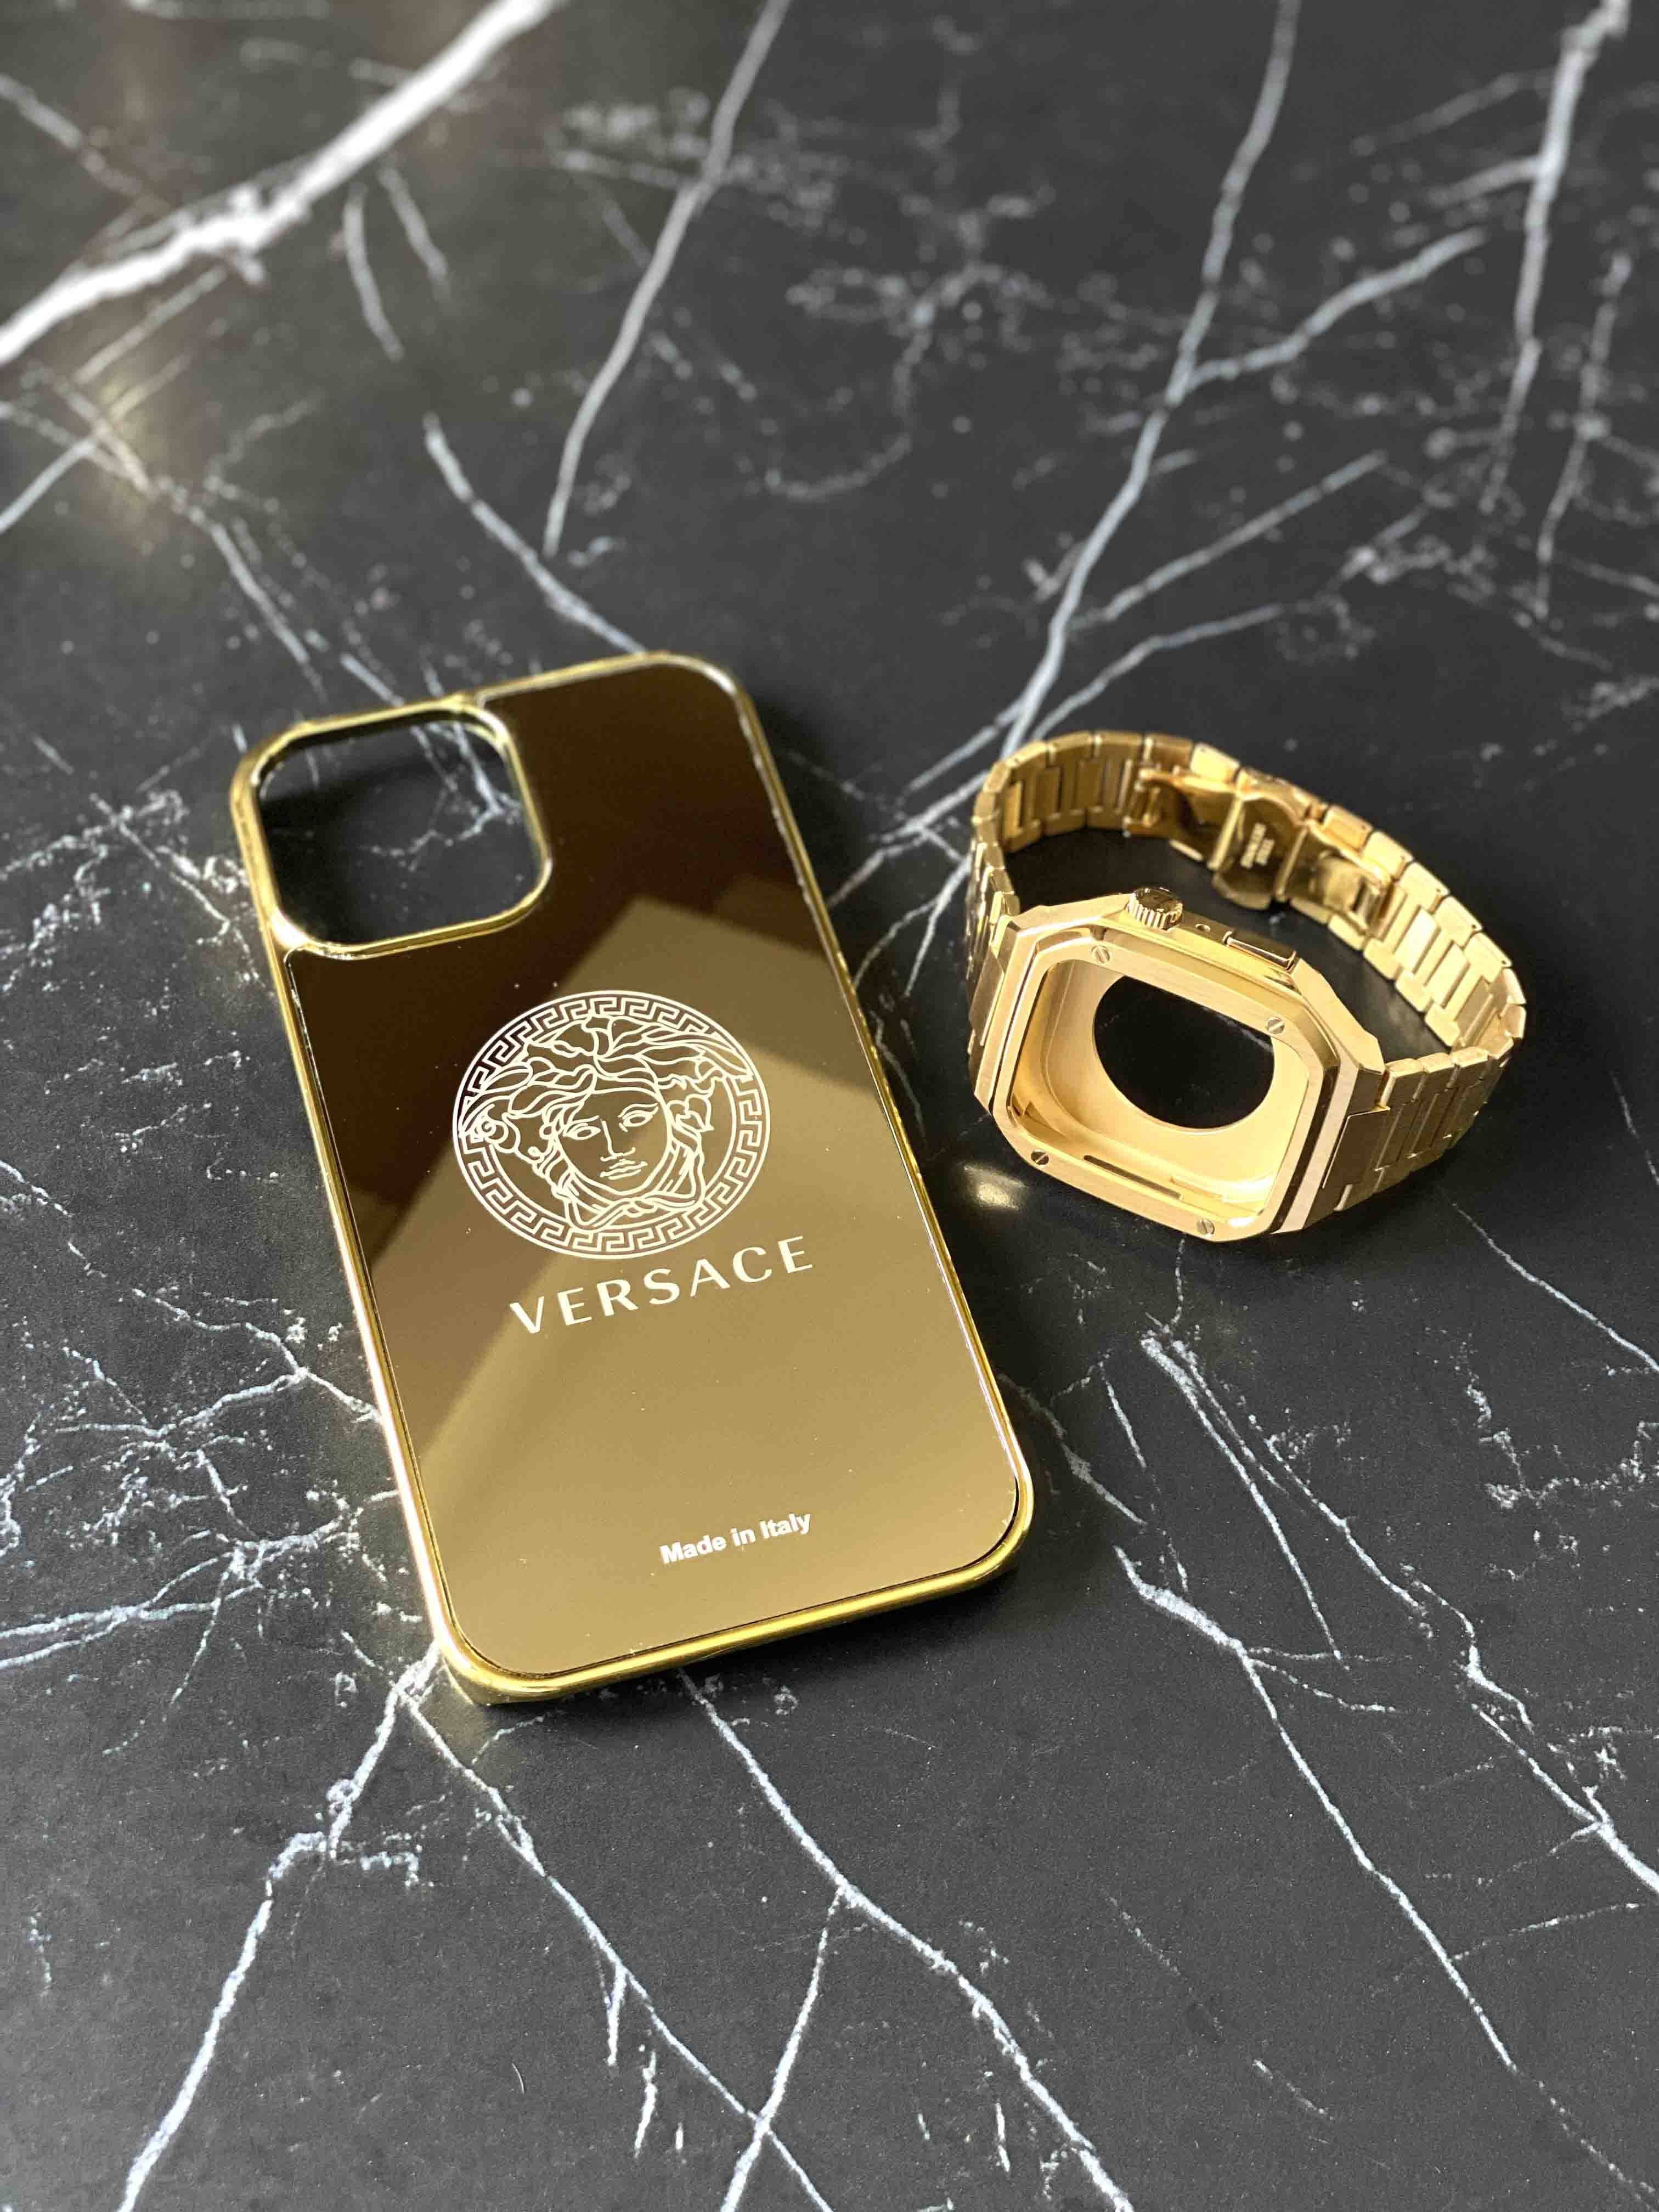 Iphone Versace | vlr.eng.br